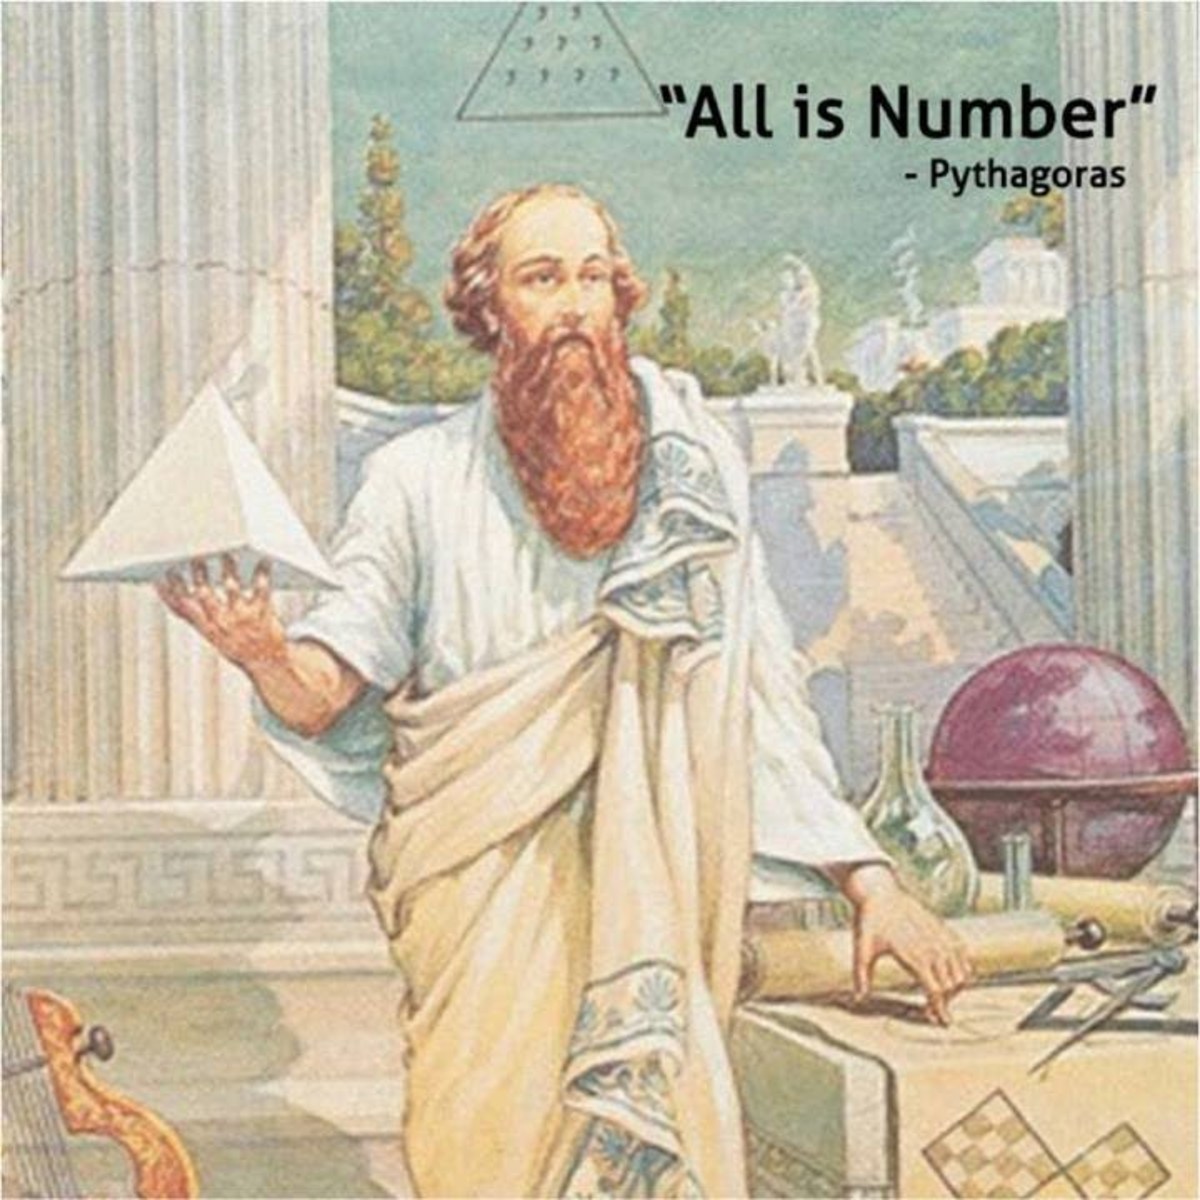 Pythagoras really knew his triangles, but in baseball he failed to account for really bad pitching.